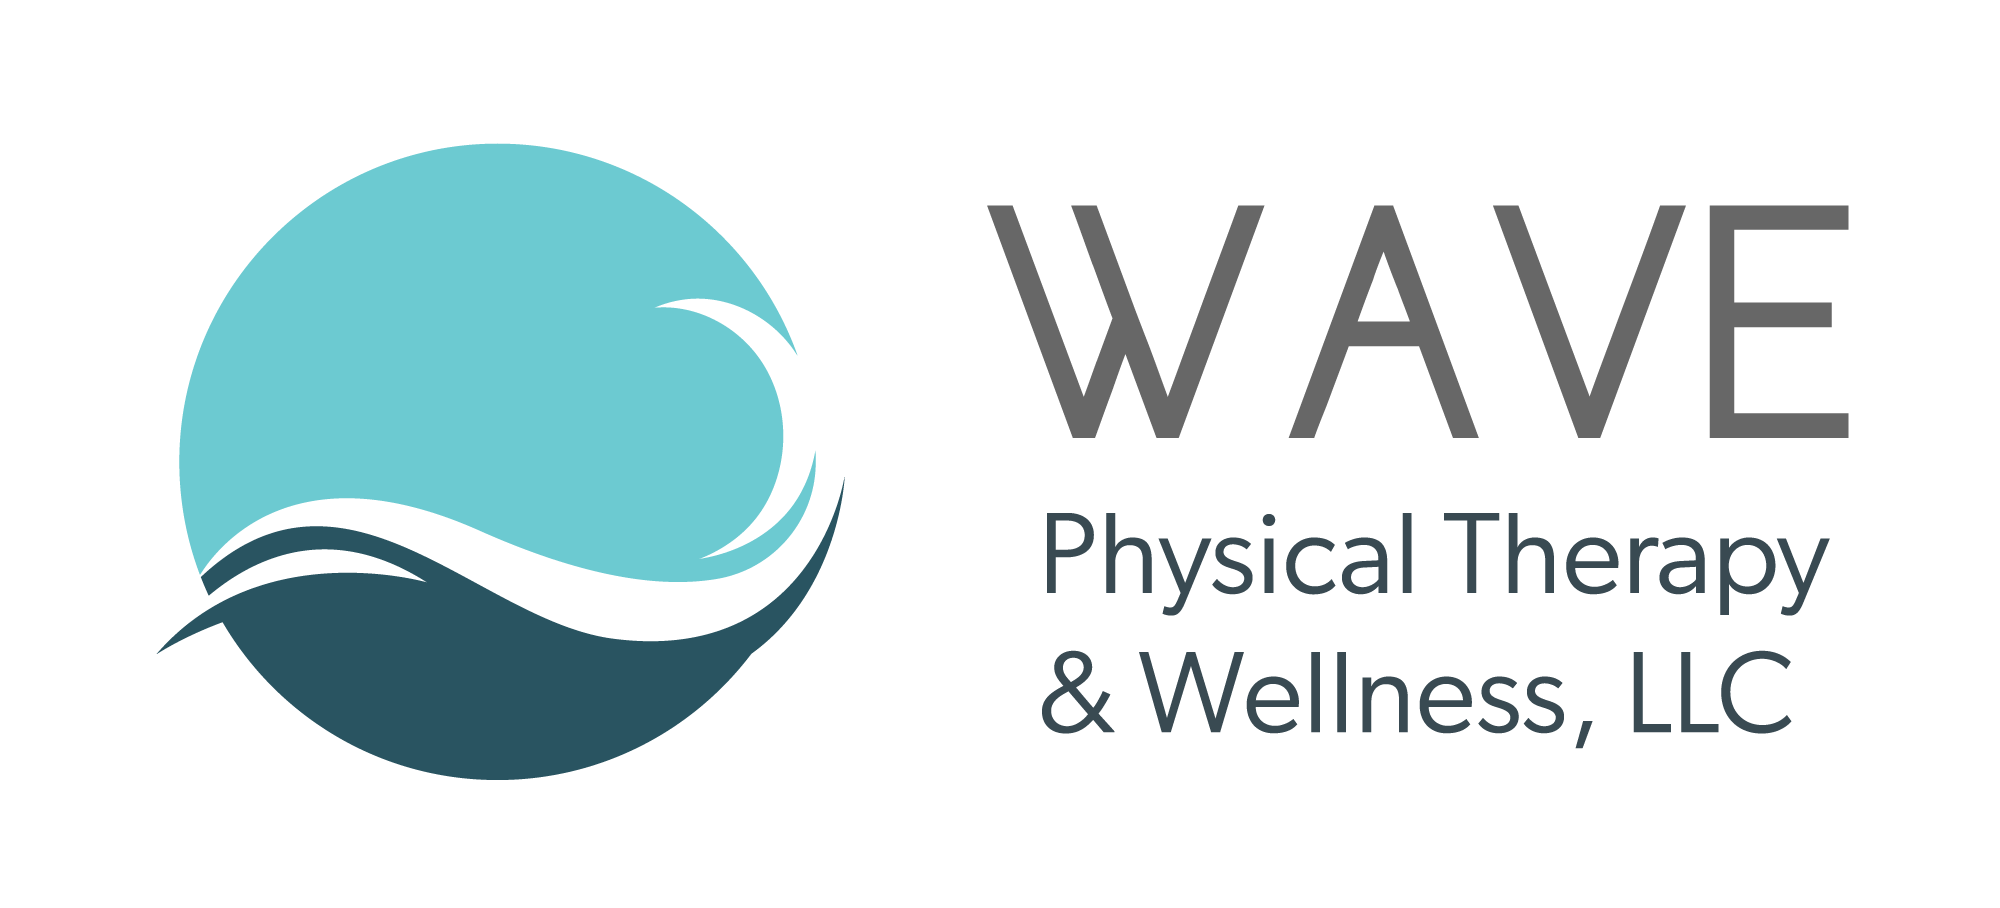 Wave Physical Therapy & Wellness